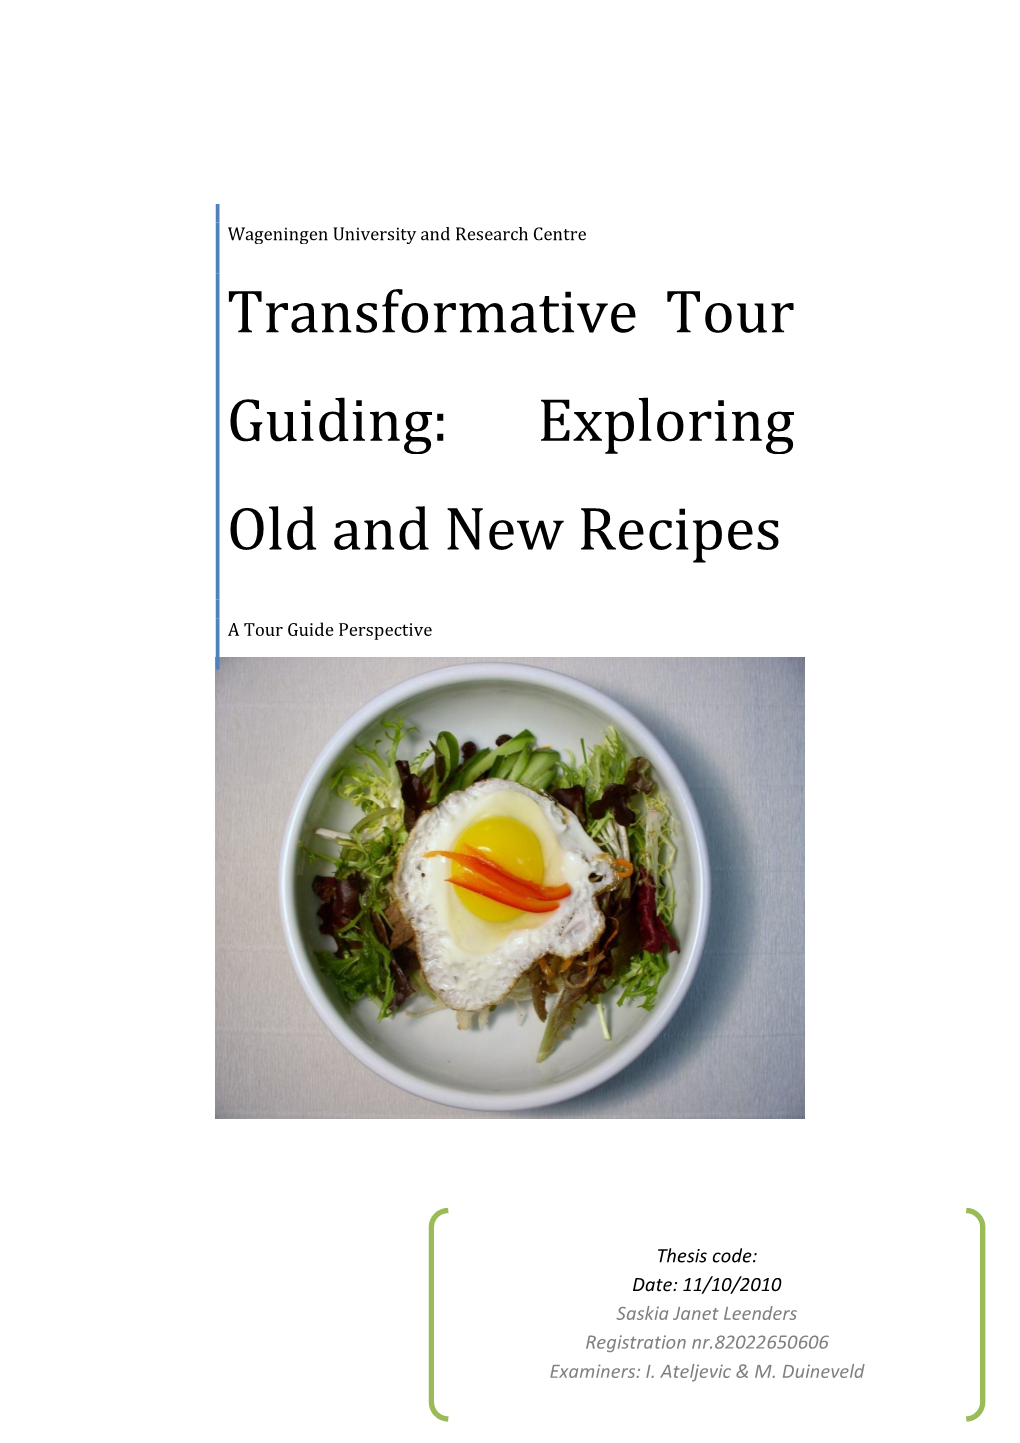 Transformative Tour Guiding: Exploring Old and New Recipes